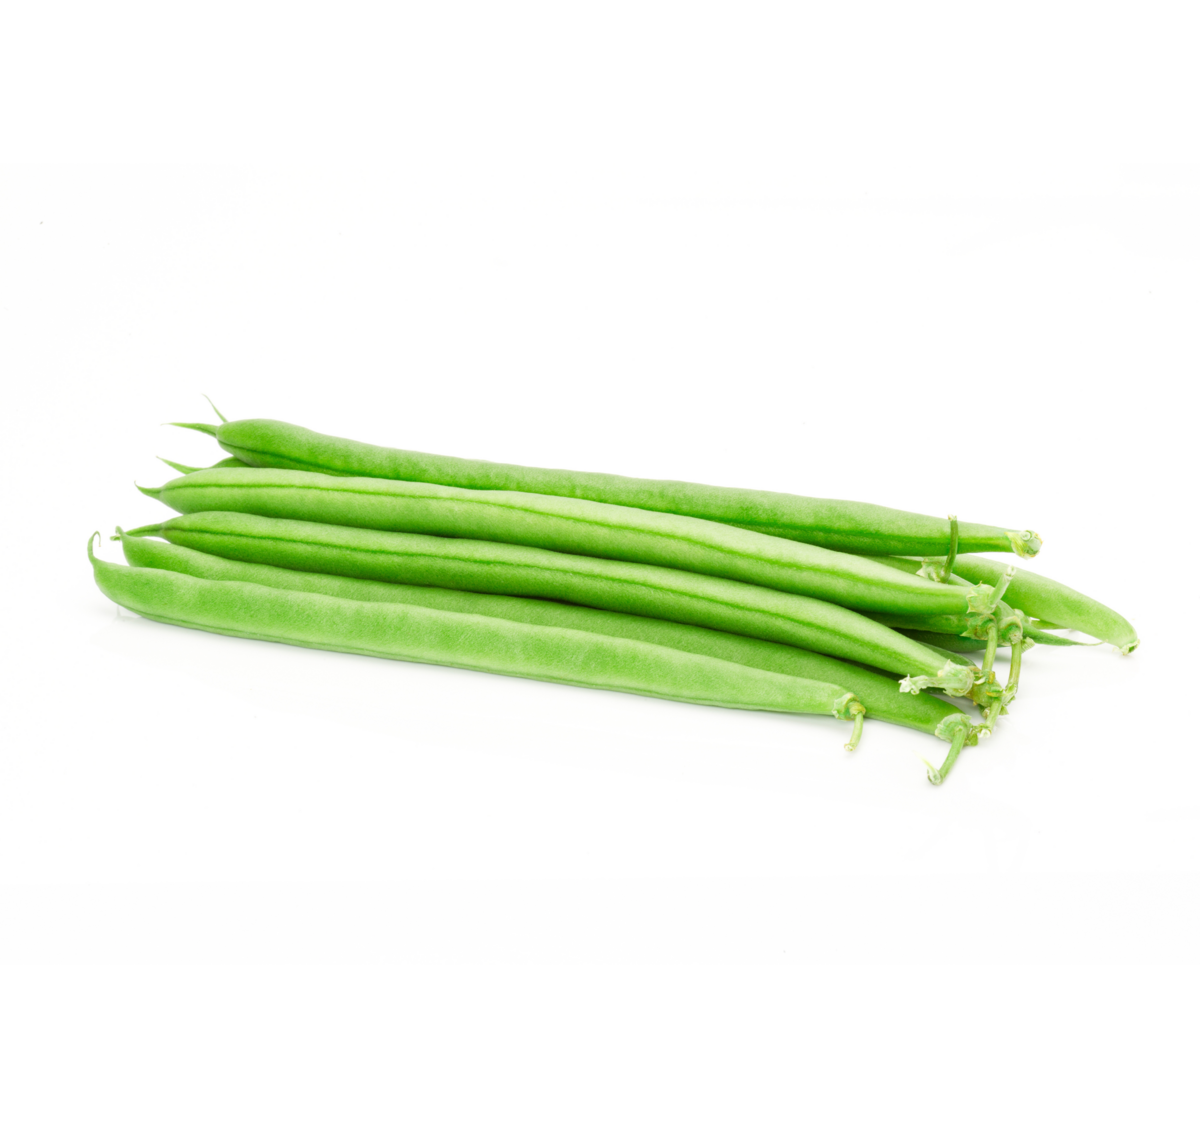 Green beans cultivation for the best quality green beans